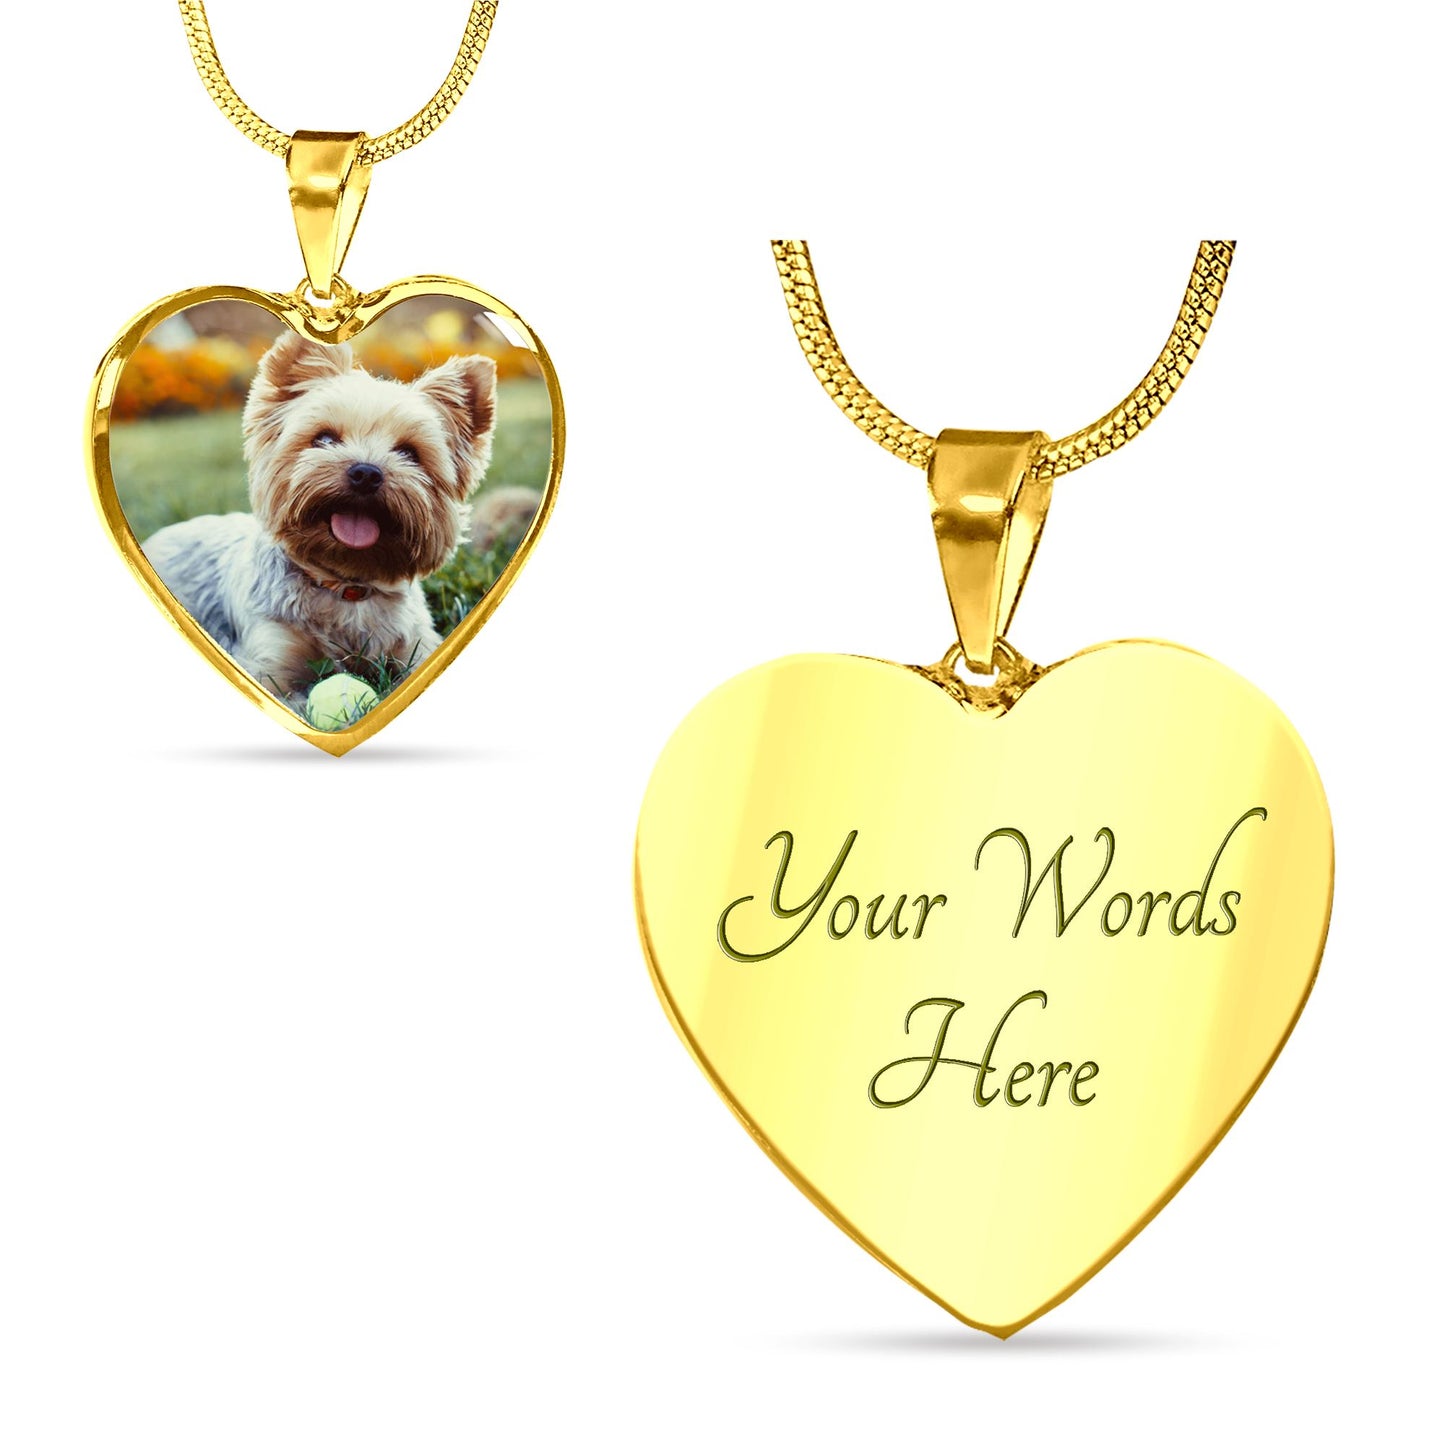 Share The Love For Your Furry Friend With Our Customizable Dog Lover Necklace Jewelry 